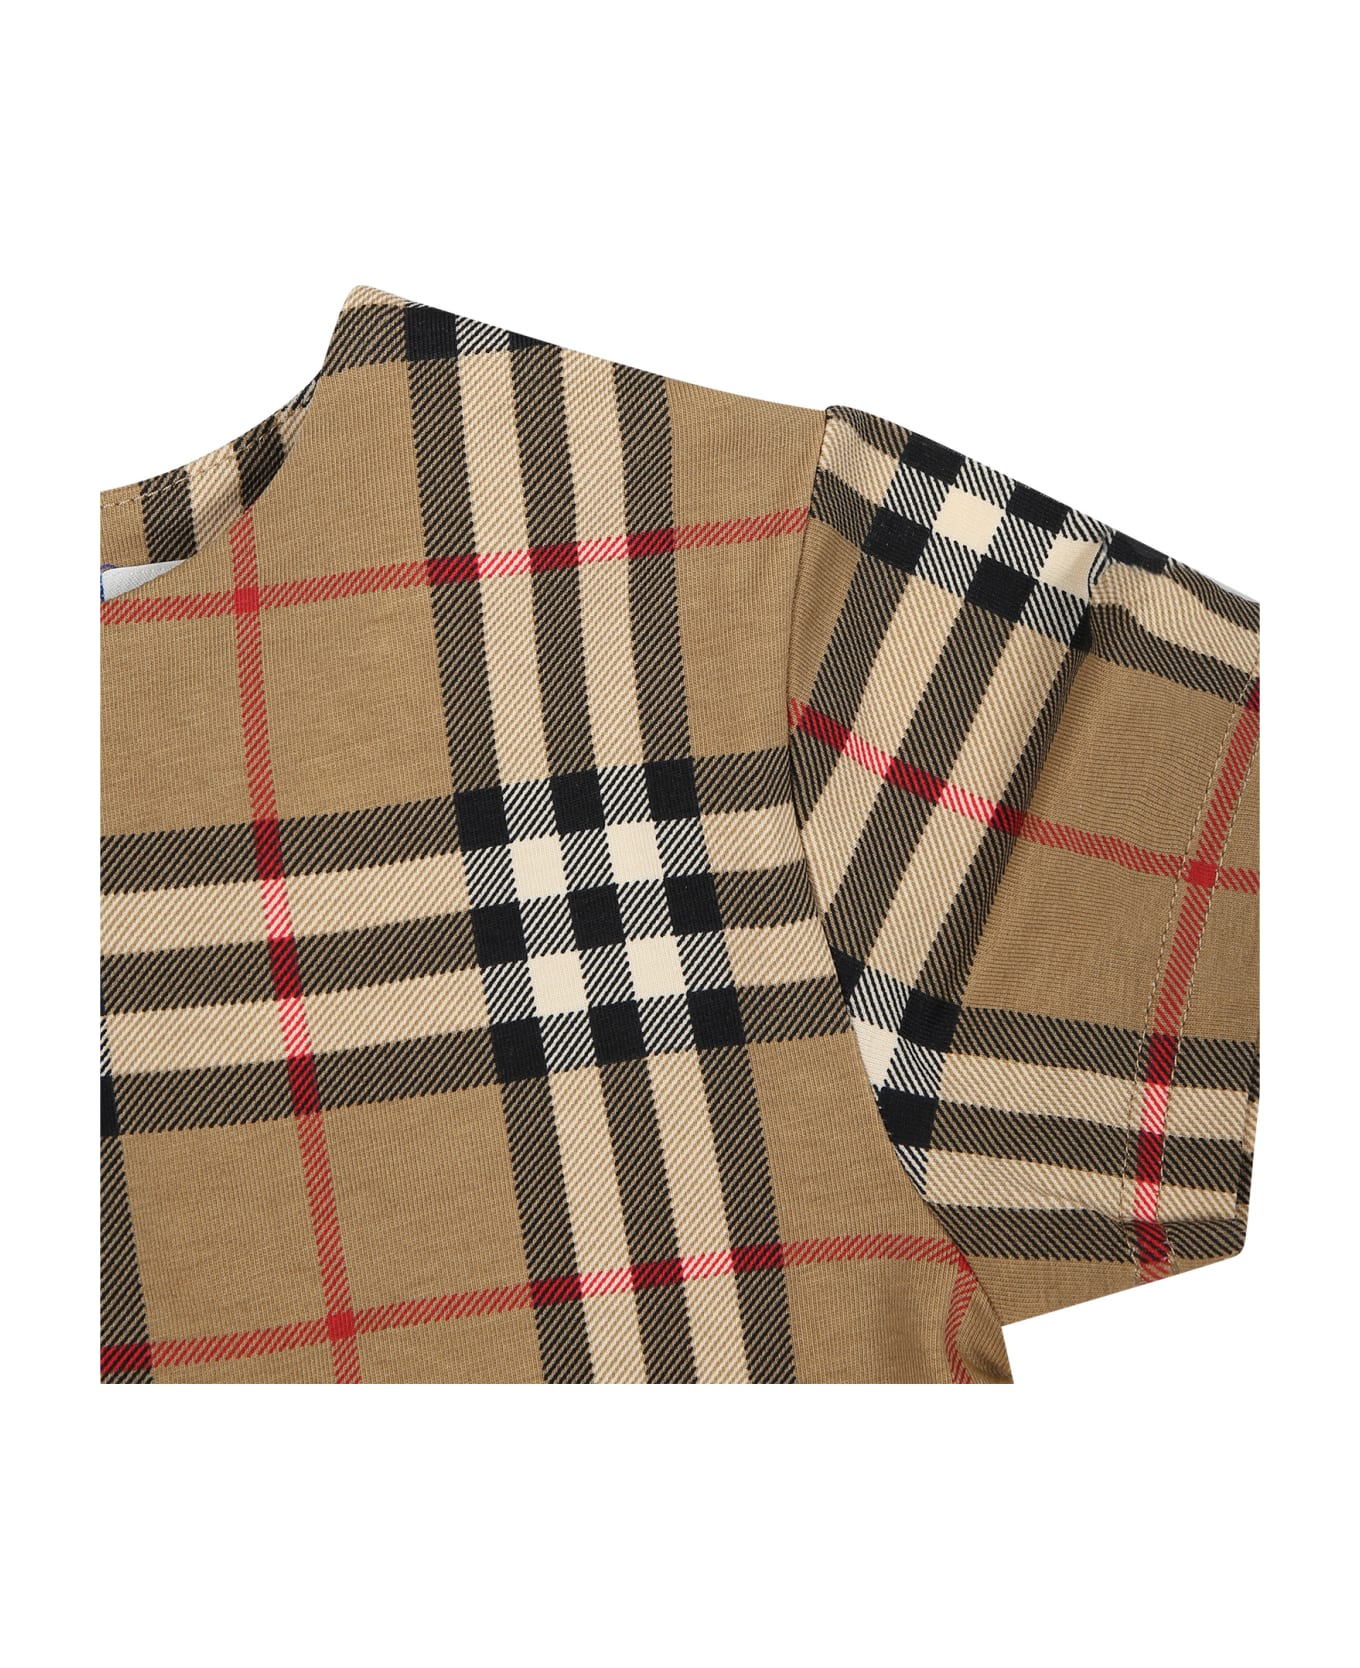 Burberry Beige Dress For Baby Girl With Iconic All-over Vintage Check - Beige ウェア